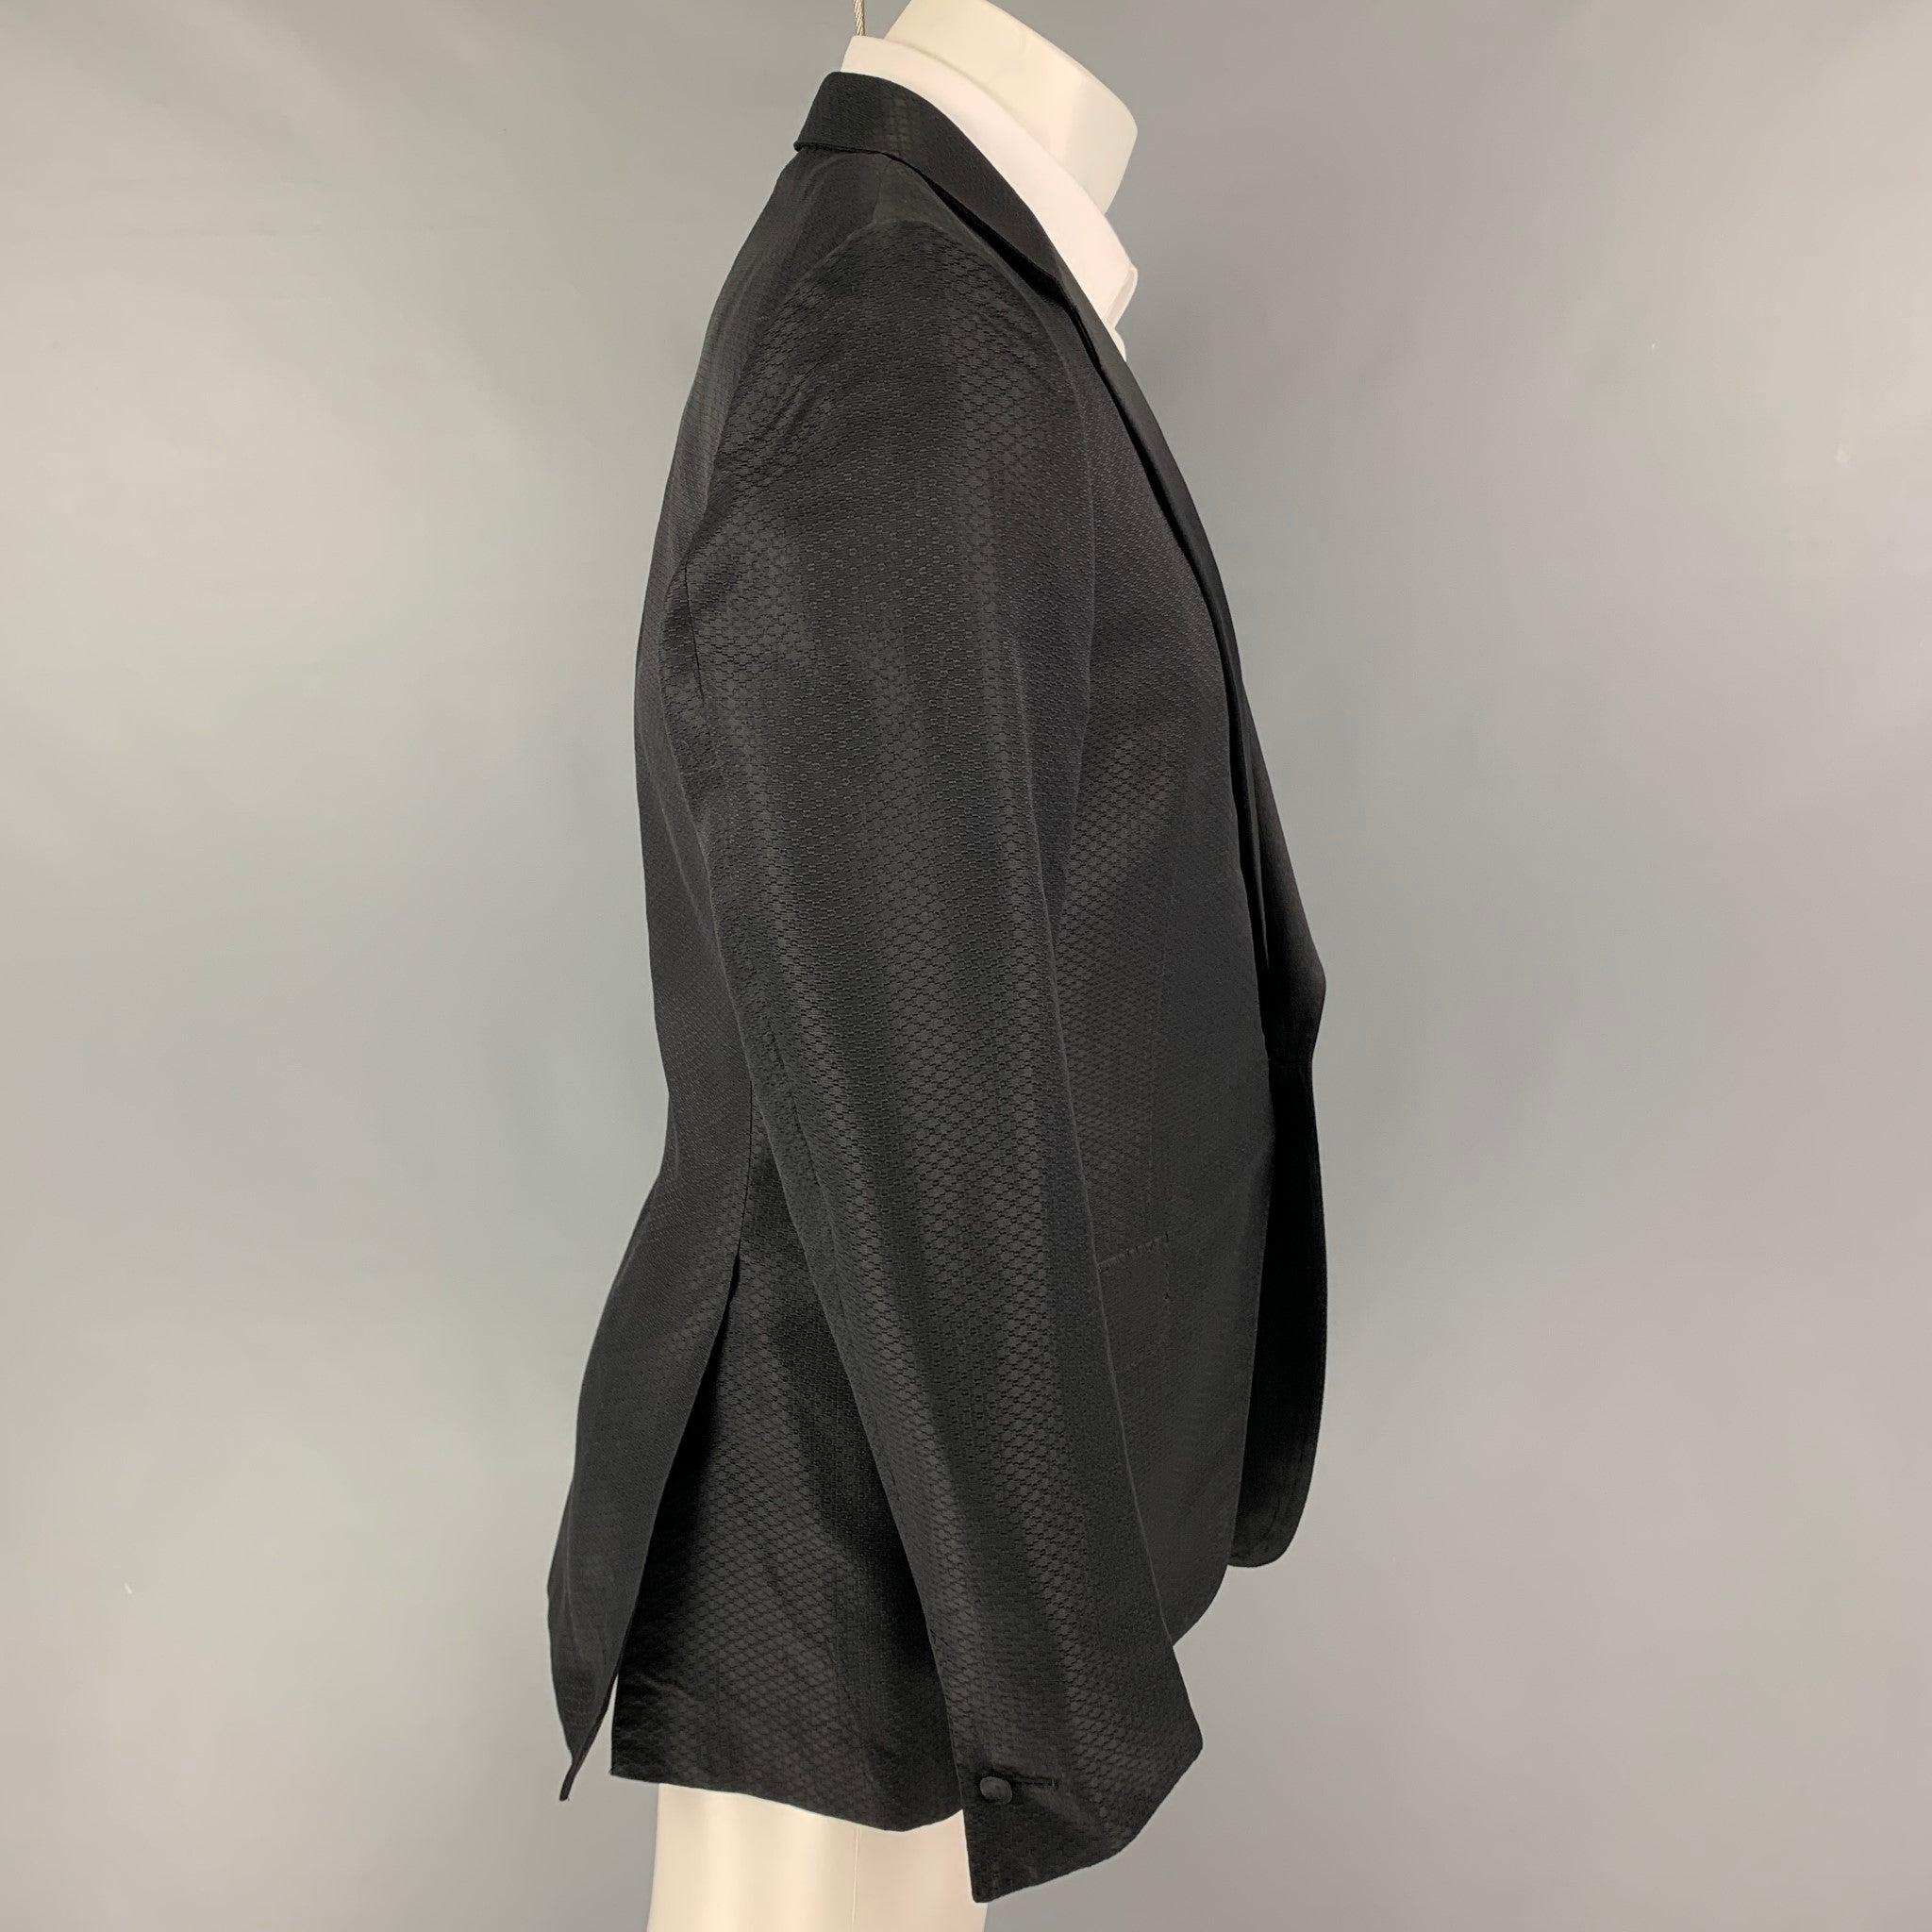 YVES SAINT LAURENT by Tom Ford sport coat comes in a black textured / silk featuring a notch lapel, flap pockets, double back vent, and a single button closure. Made in Italy.
Very Good
Pre-Owned Condition.  

Marked:   50 

Measurements: 
